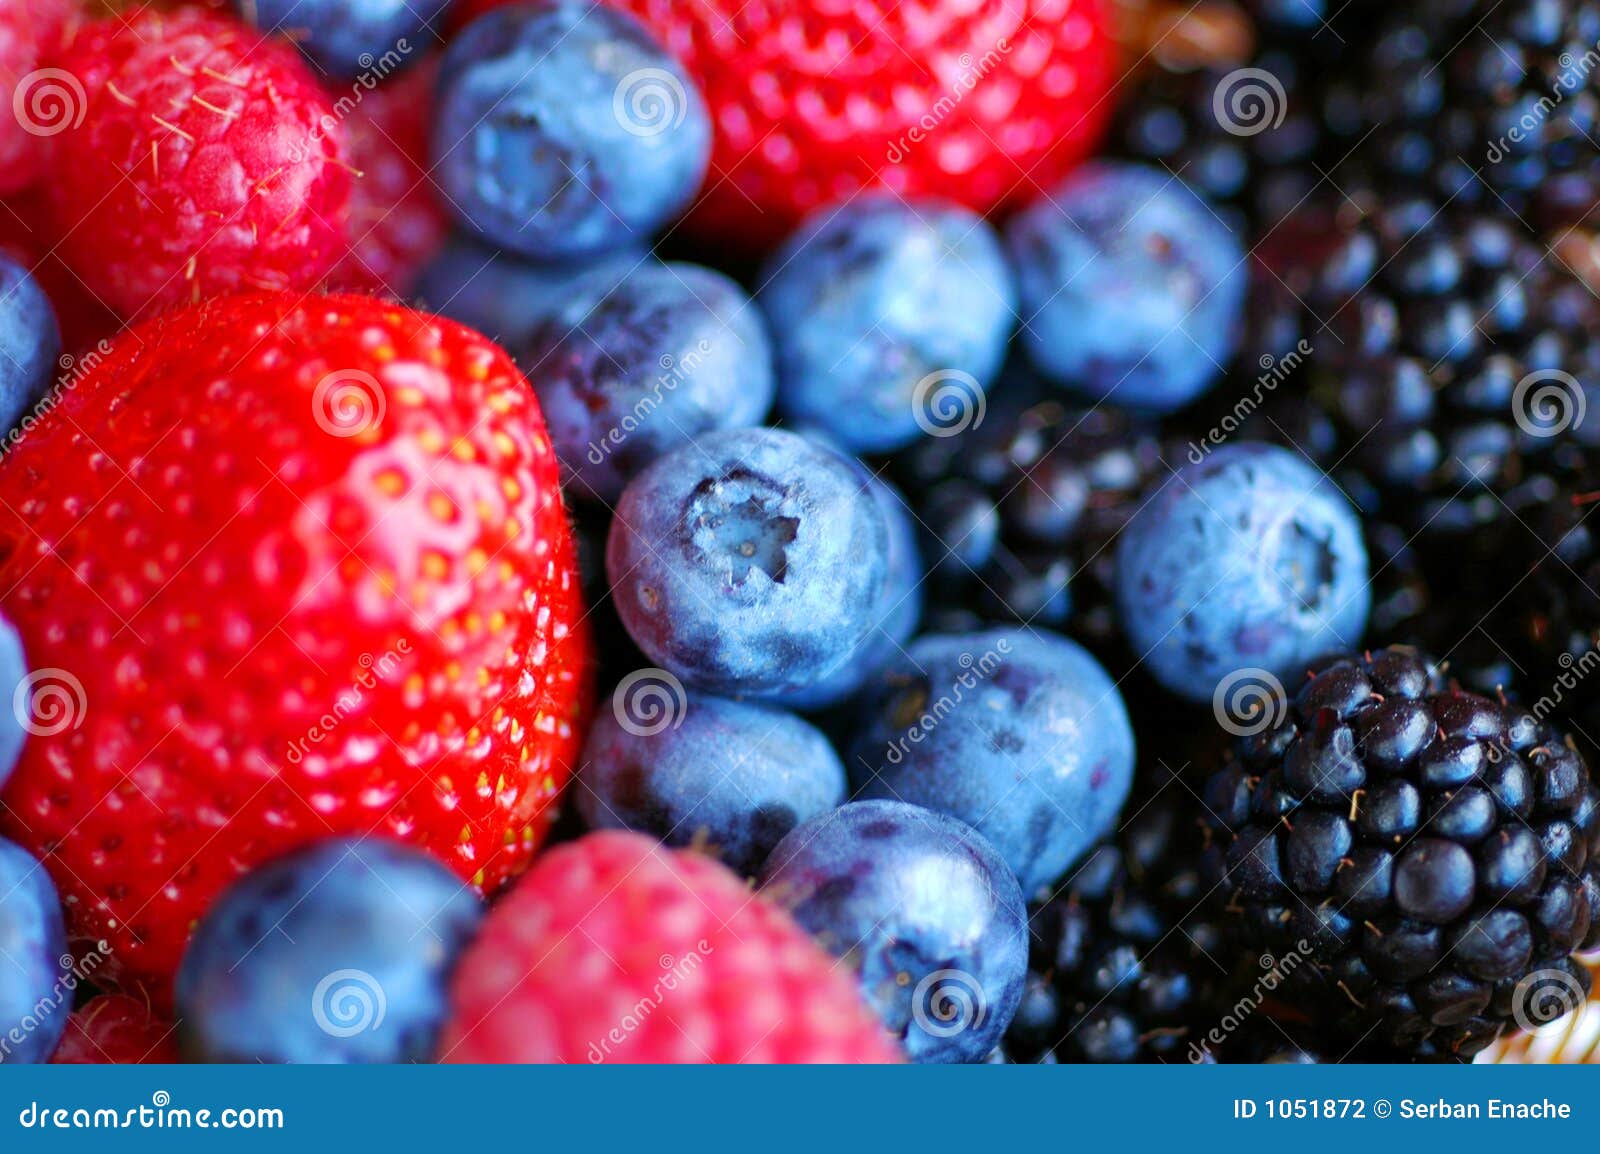 forest fruits - berries